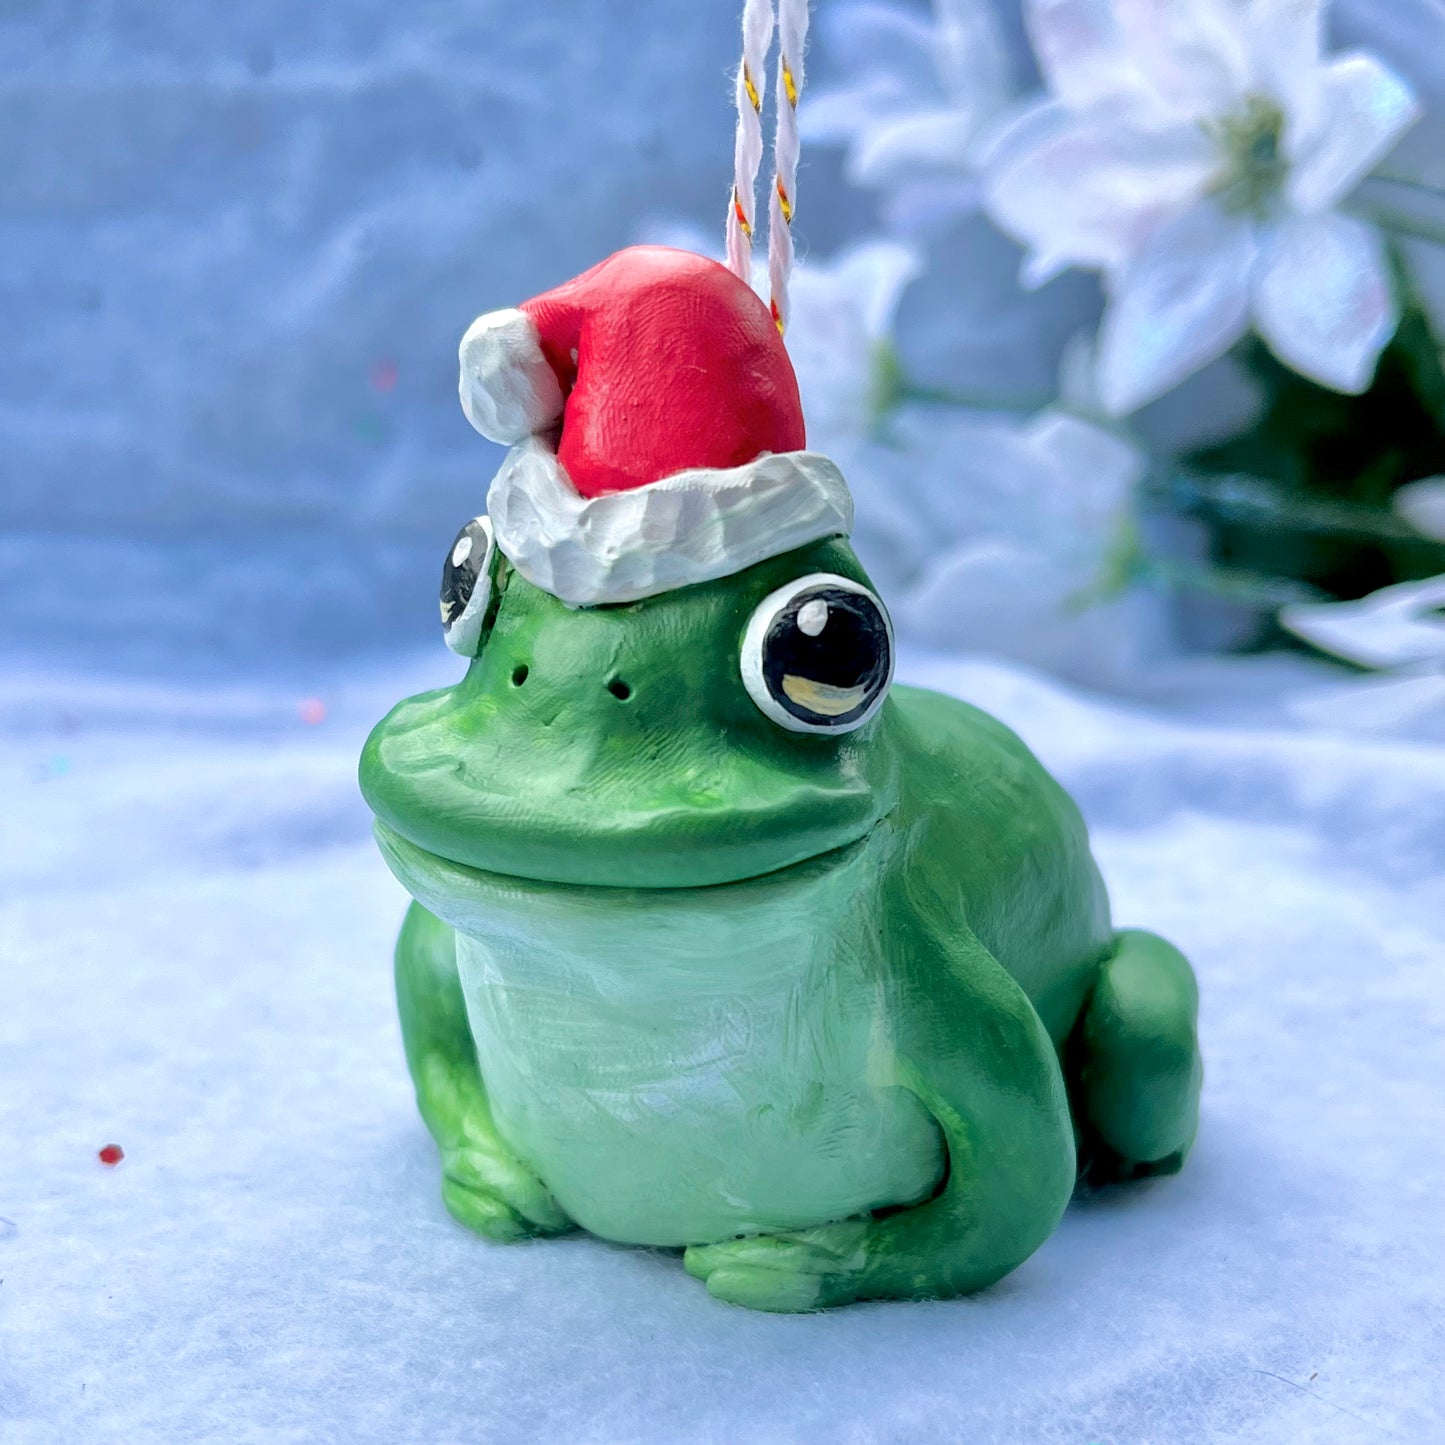 Handmade Polymer Clay Holiday Frog and Toad Glittery Ornament Figurine